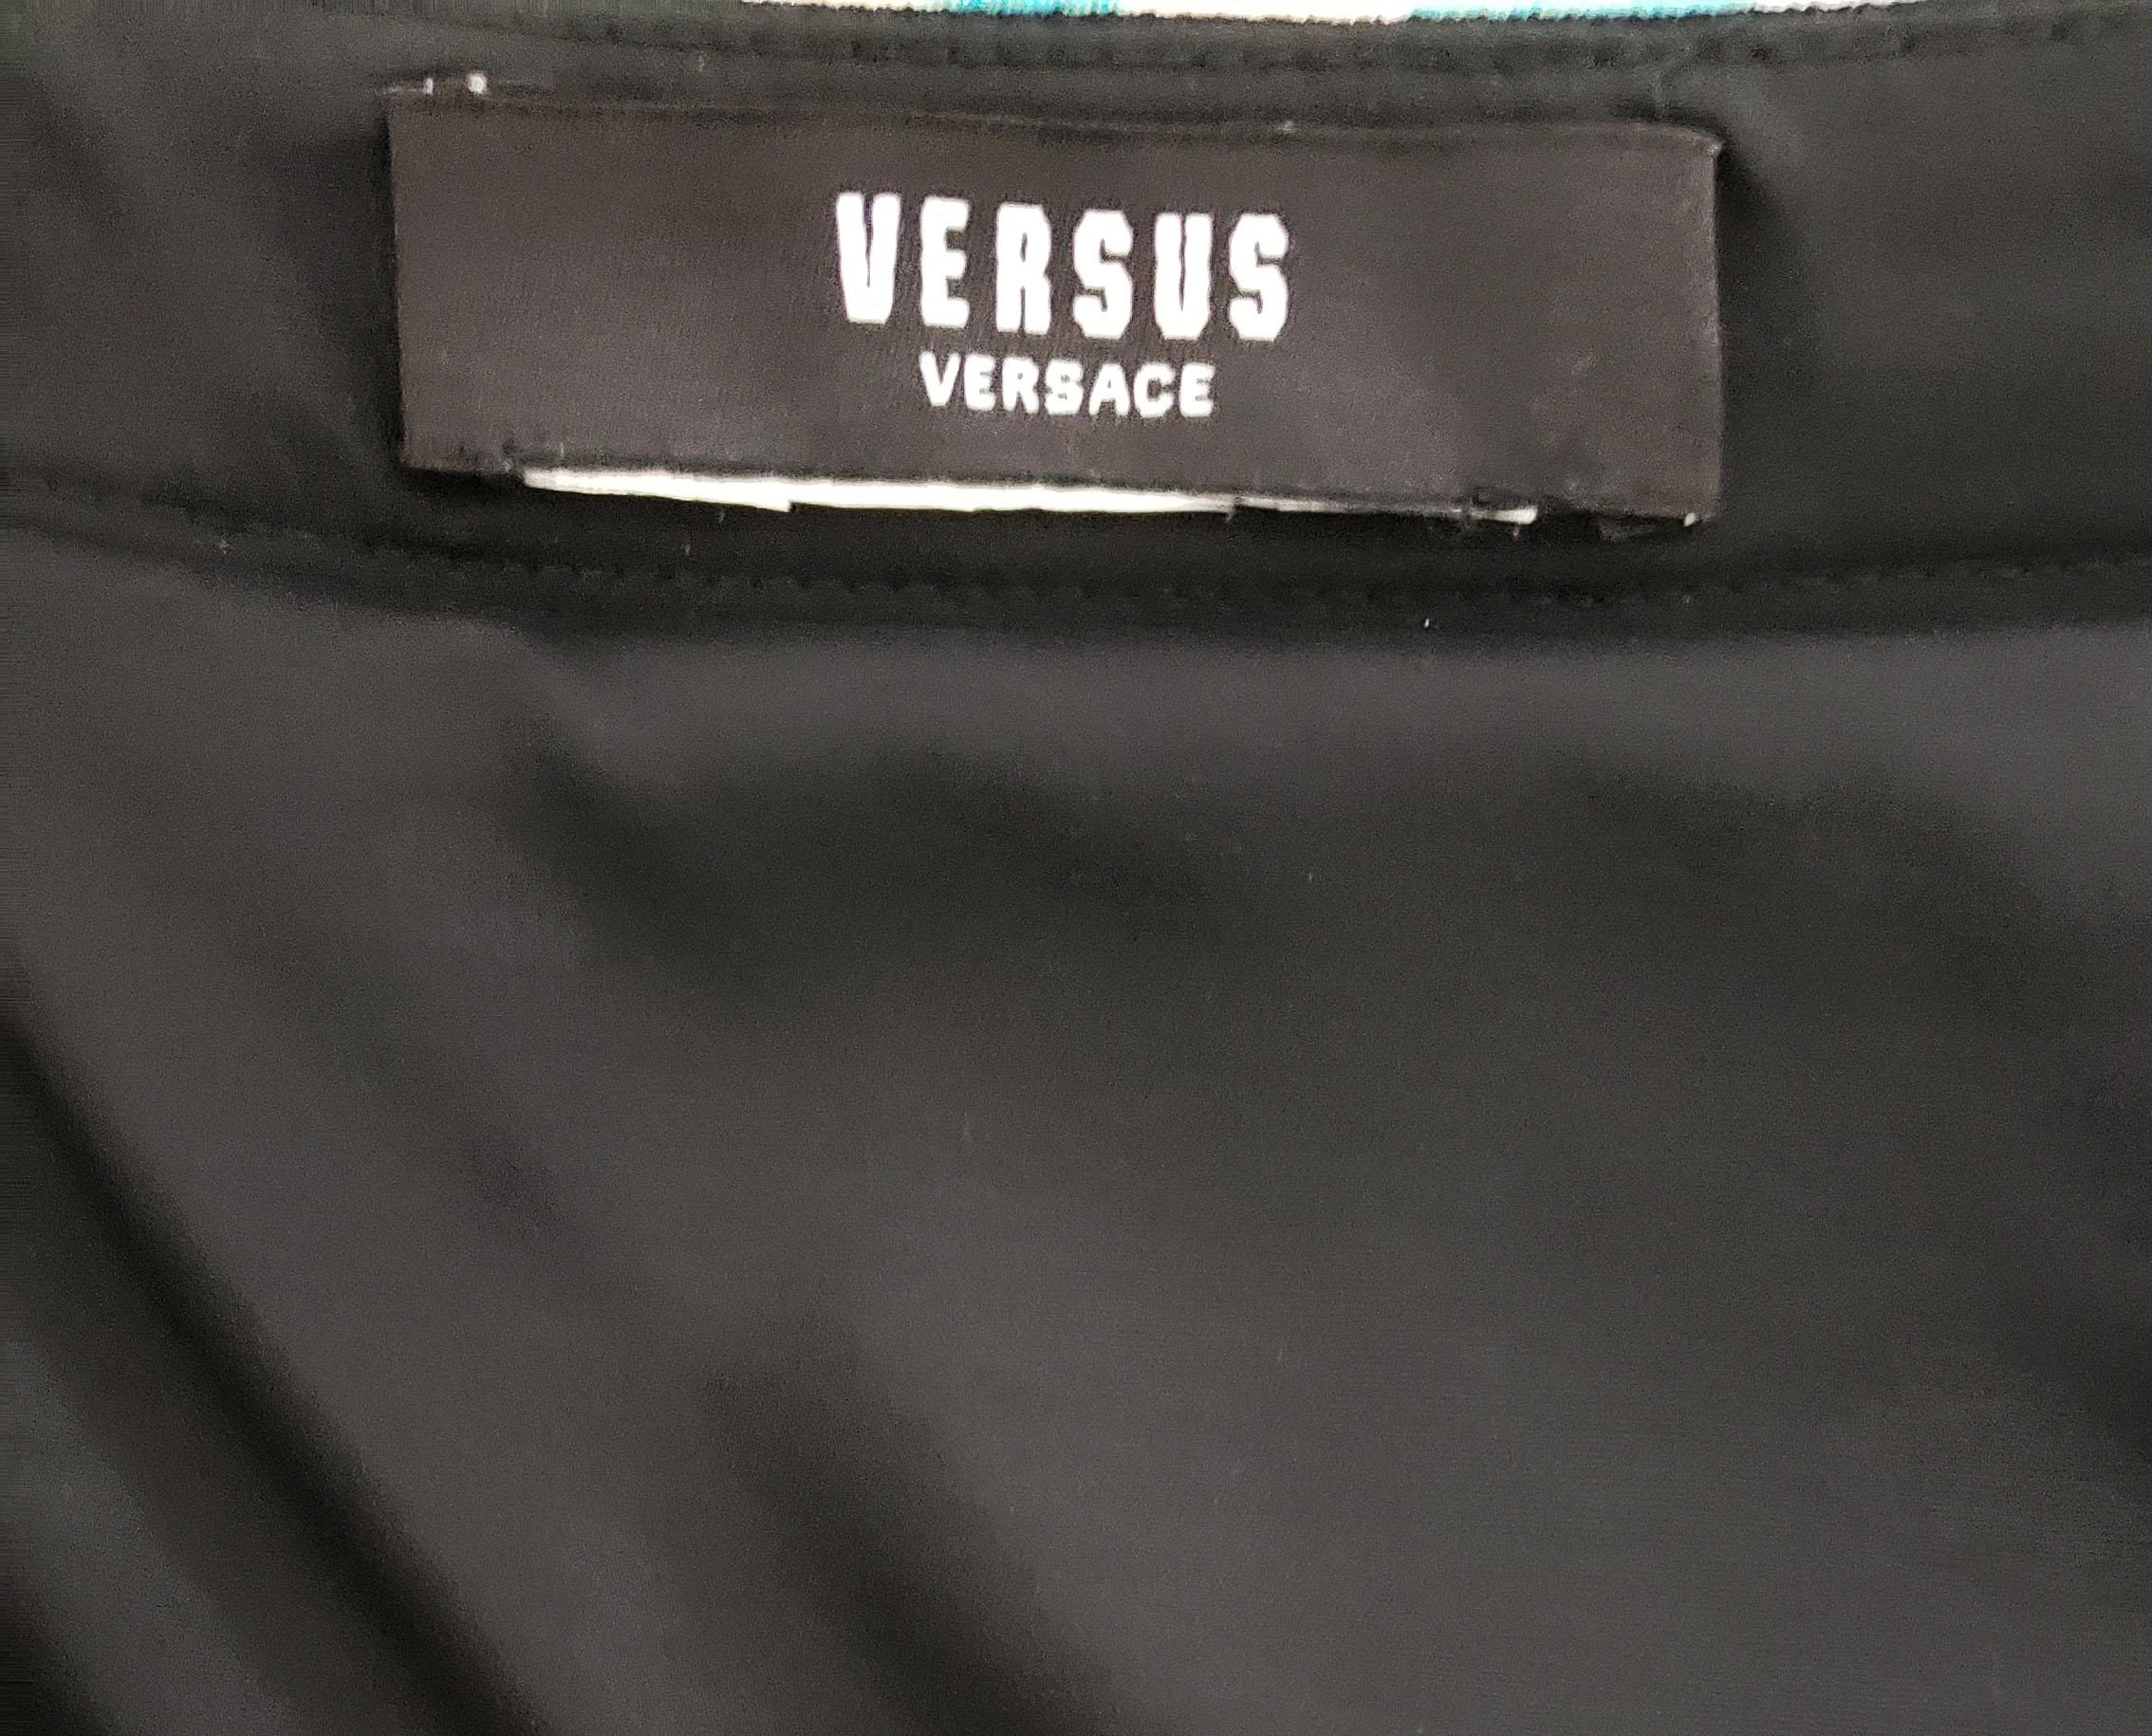 VERSUS VERSACE+ ANTHONY VACCARELLO BLACK SKIRT W/ PLEXIGLASS and LIONS 38 - 2 For Sale 4